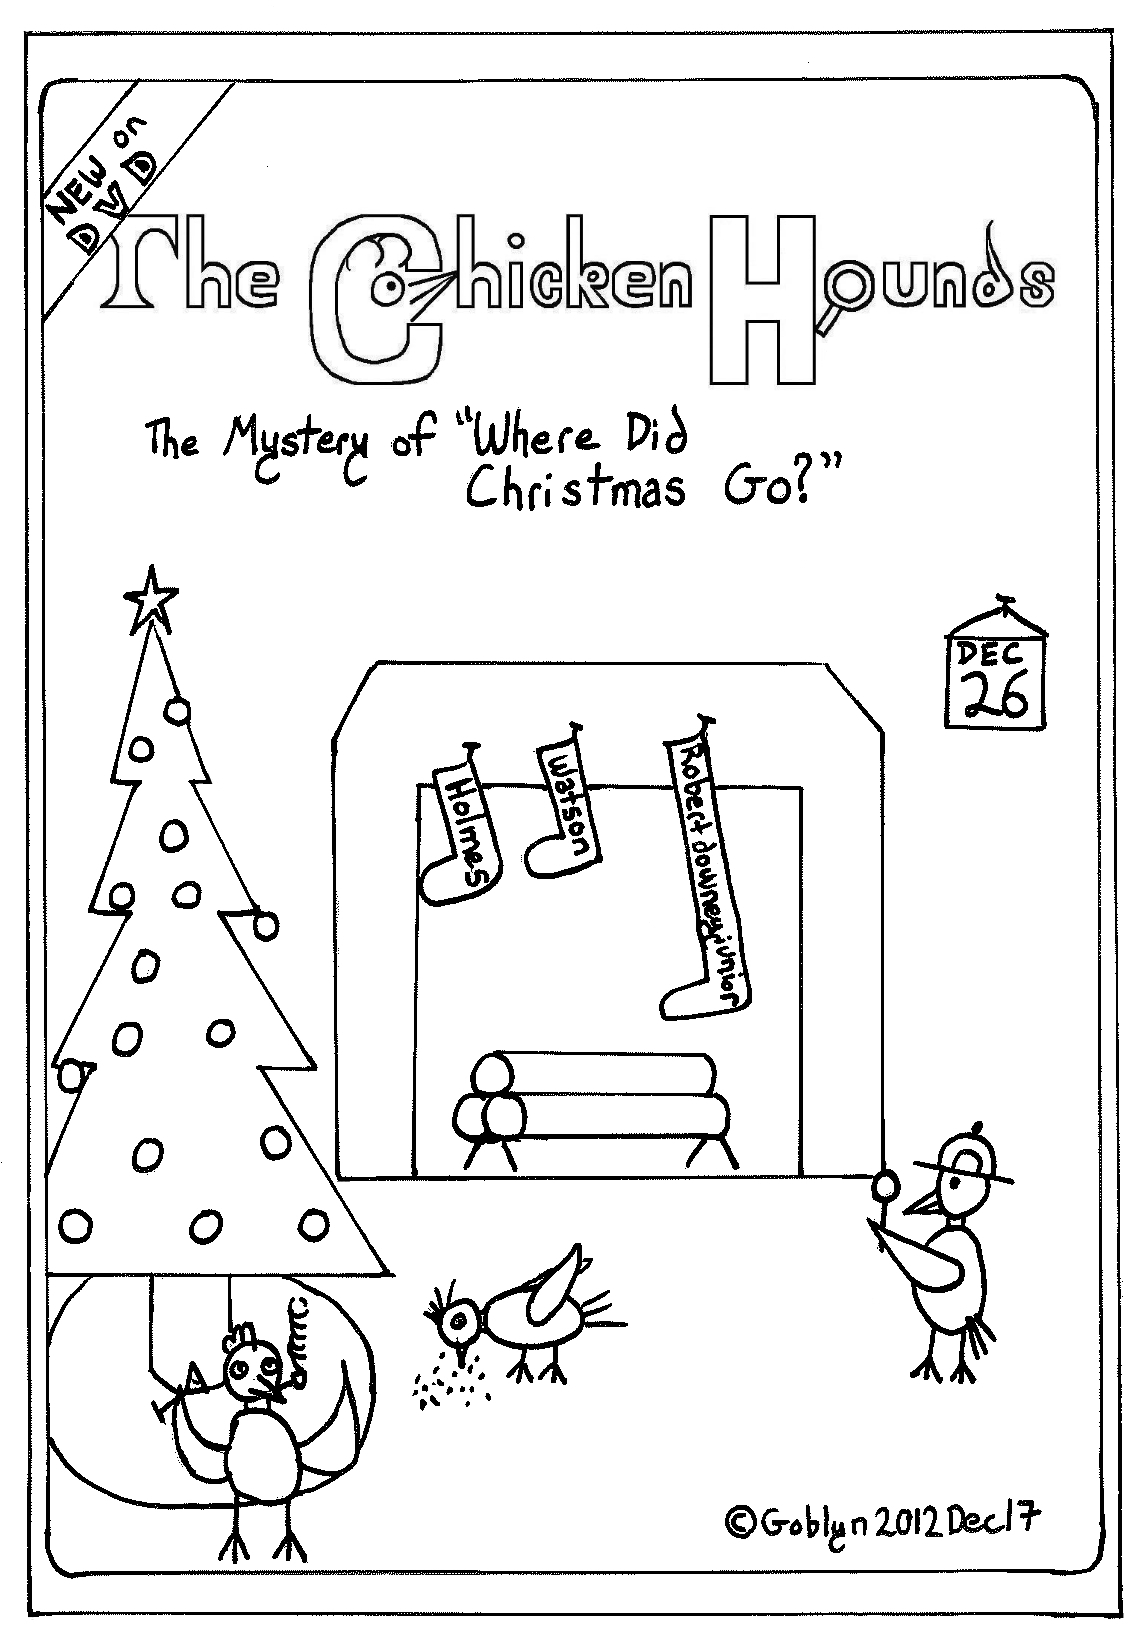 The Chicken Hounds, San Francisco's Greatest Detectives in the Mystery of "Where Did Christmas Go?"